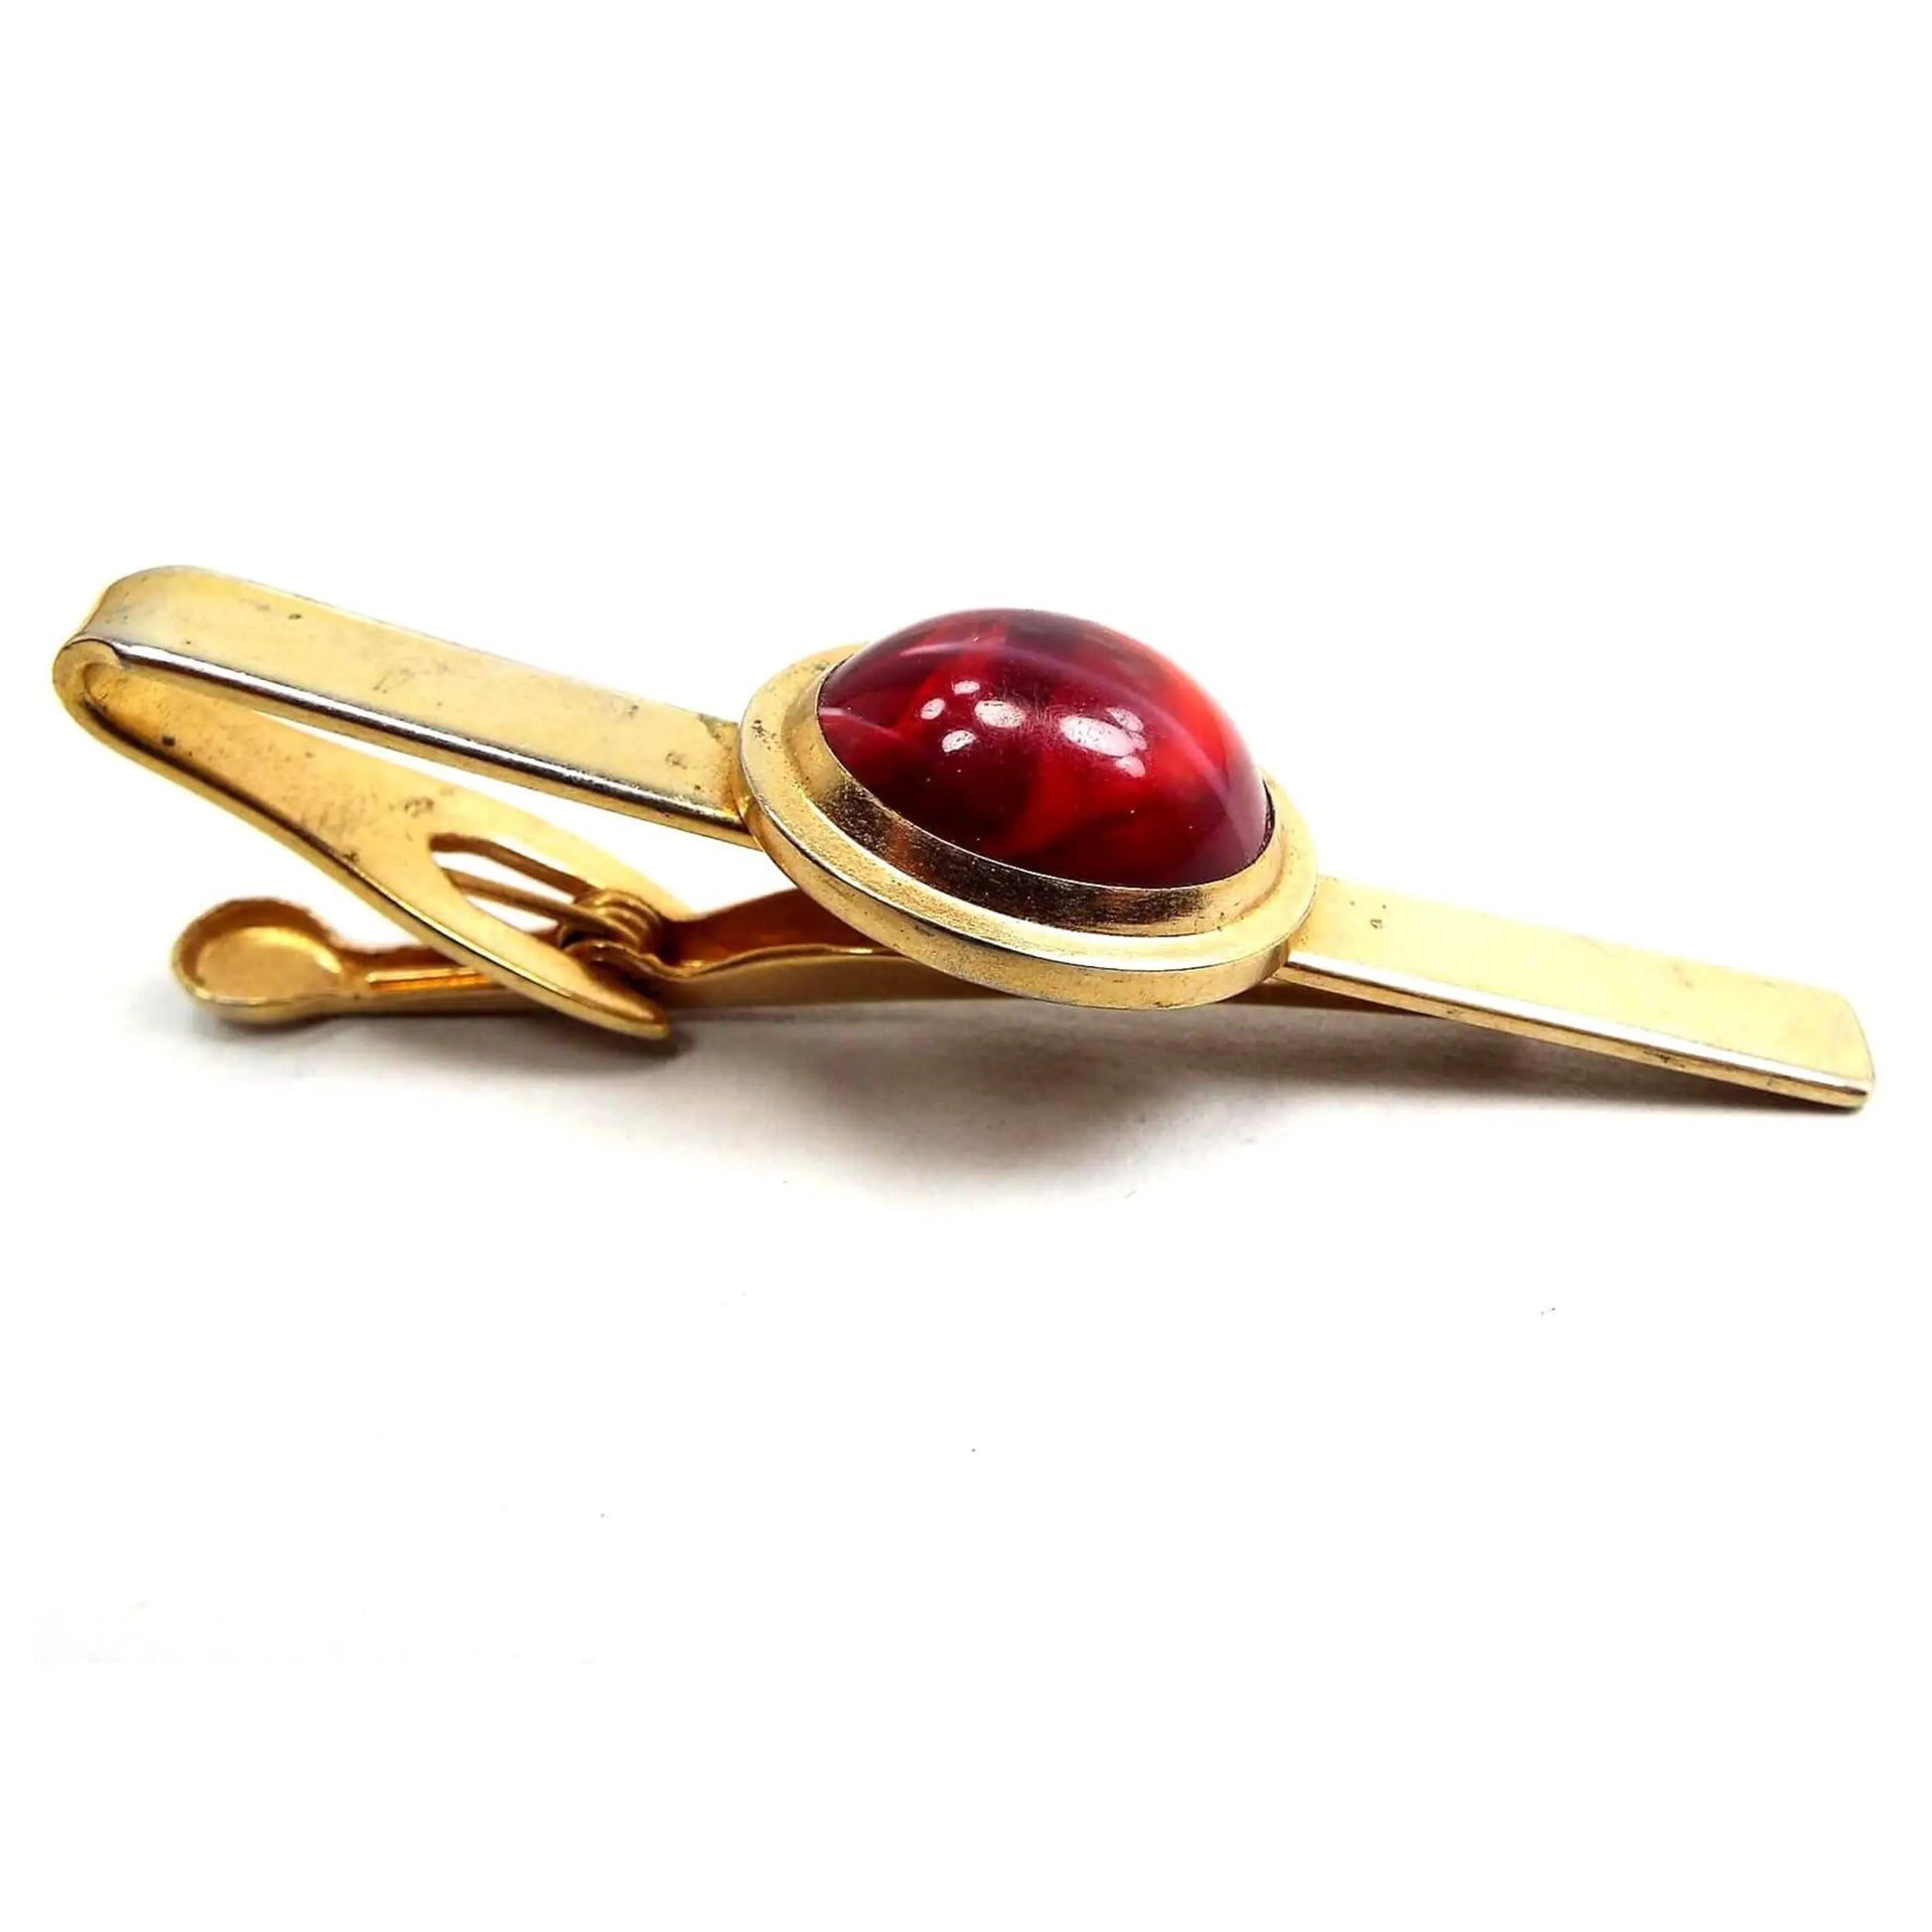 Angled view of the Mid Century vintage Pioneer lucite tie clip. The metal is gold tone in color. There is an oval in the middle with a marbled red domed lucite cab.